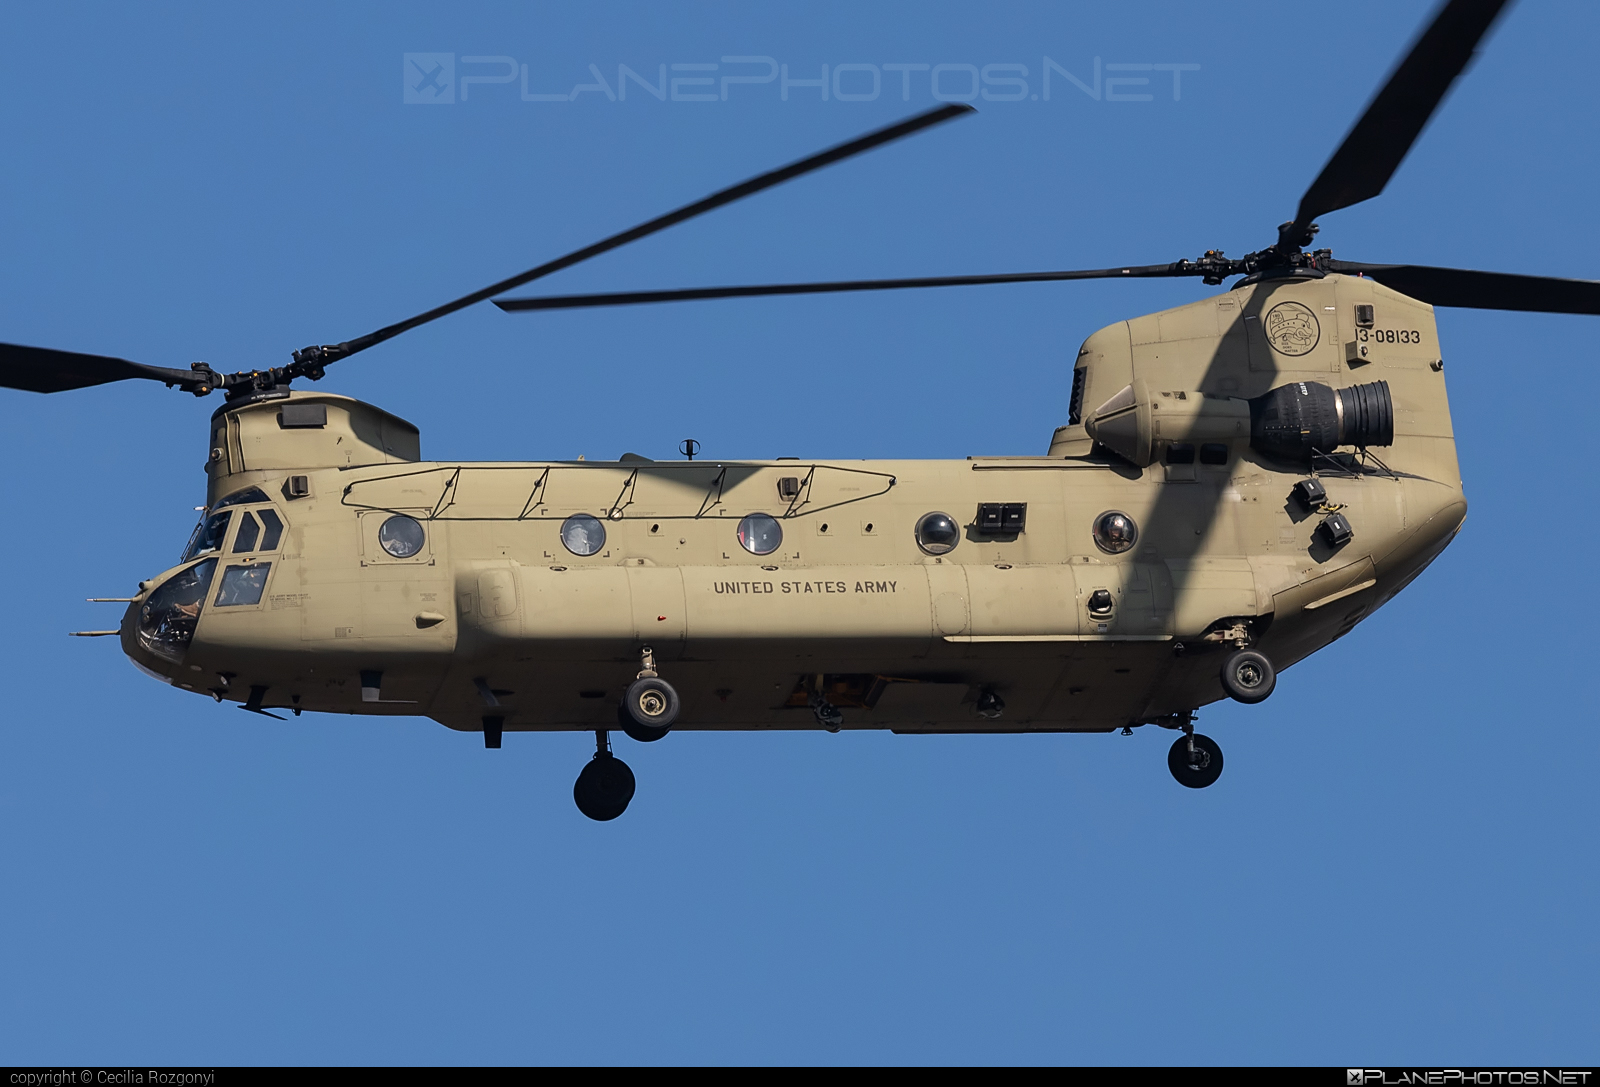 Boeing CH-47F Chinook - 13-08133 operated by US Army #boeing #usarmy